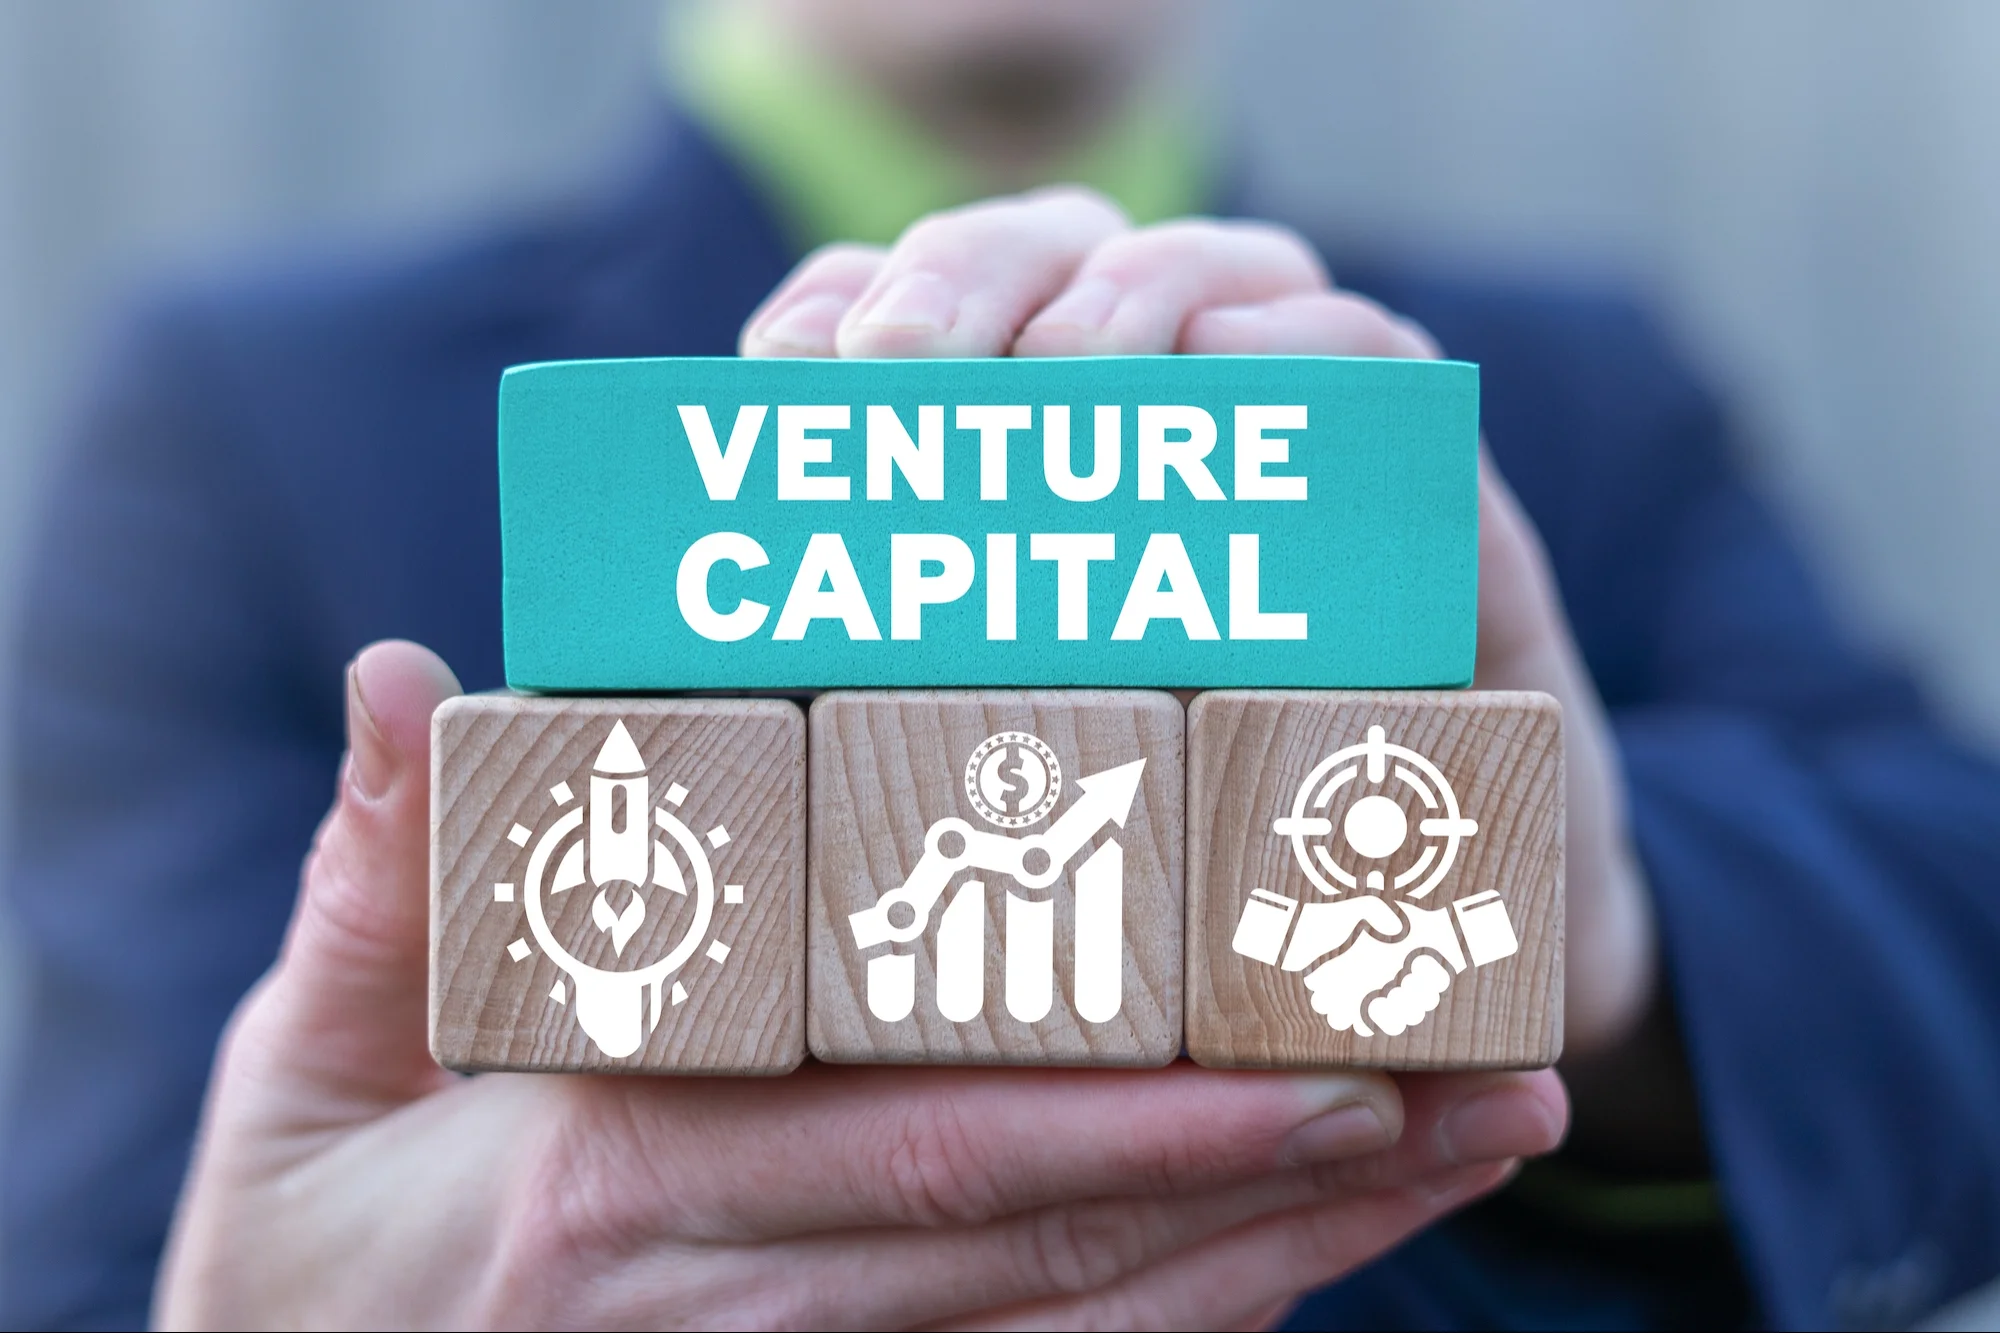 How to Get Your First Meeting With a Top Venture Capitalist